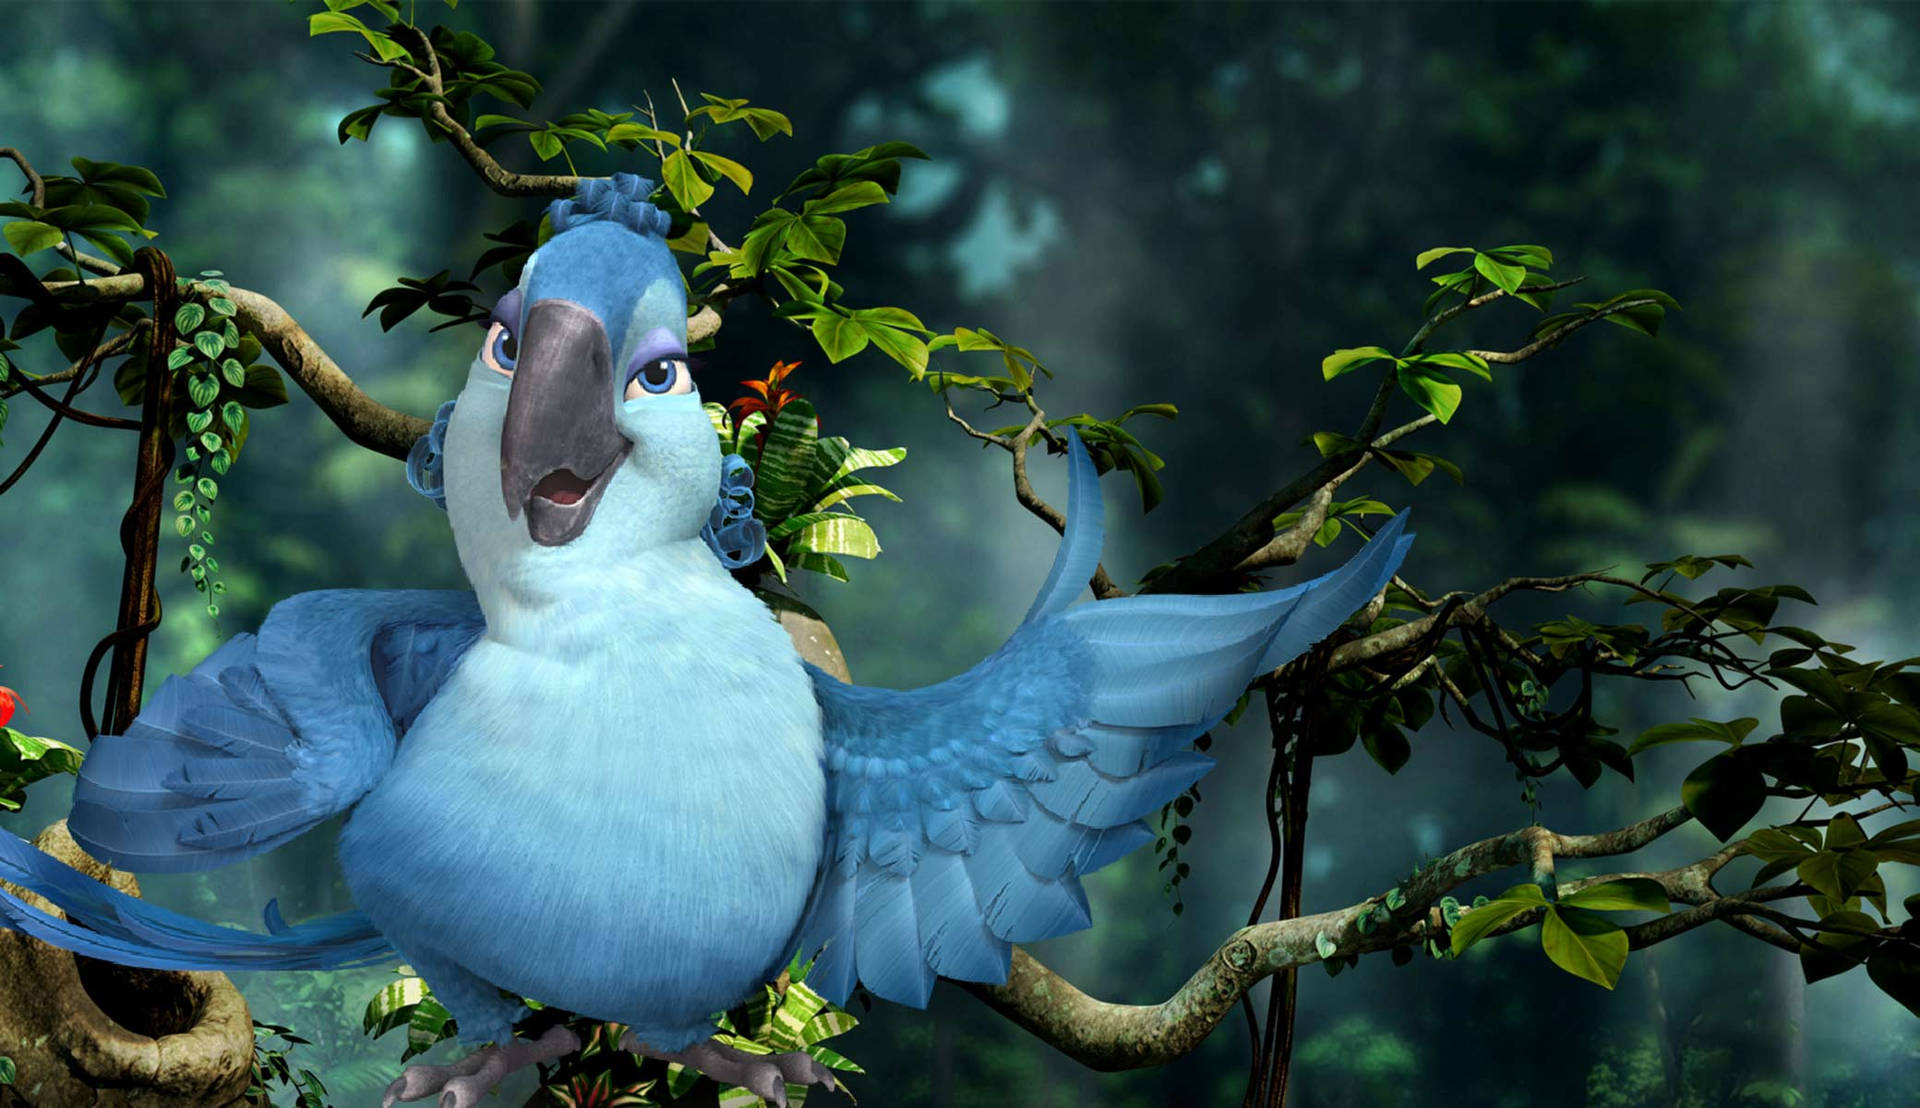 Free Rio 2 Wallpaper Downloads, [100+] Rio 2 Wallpapers for FREE |  